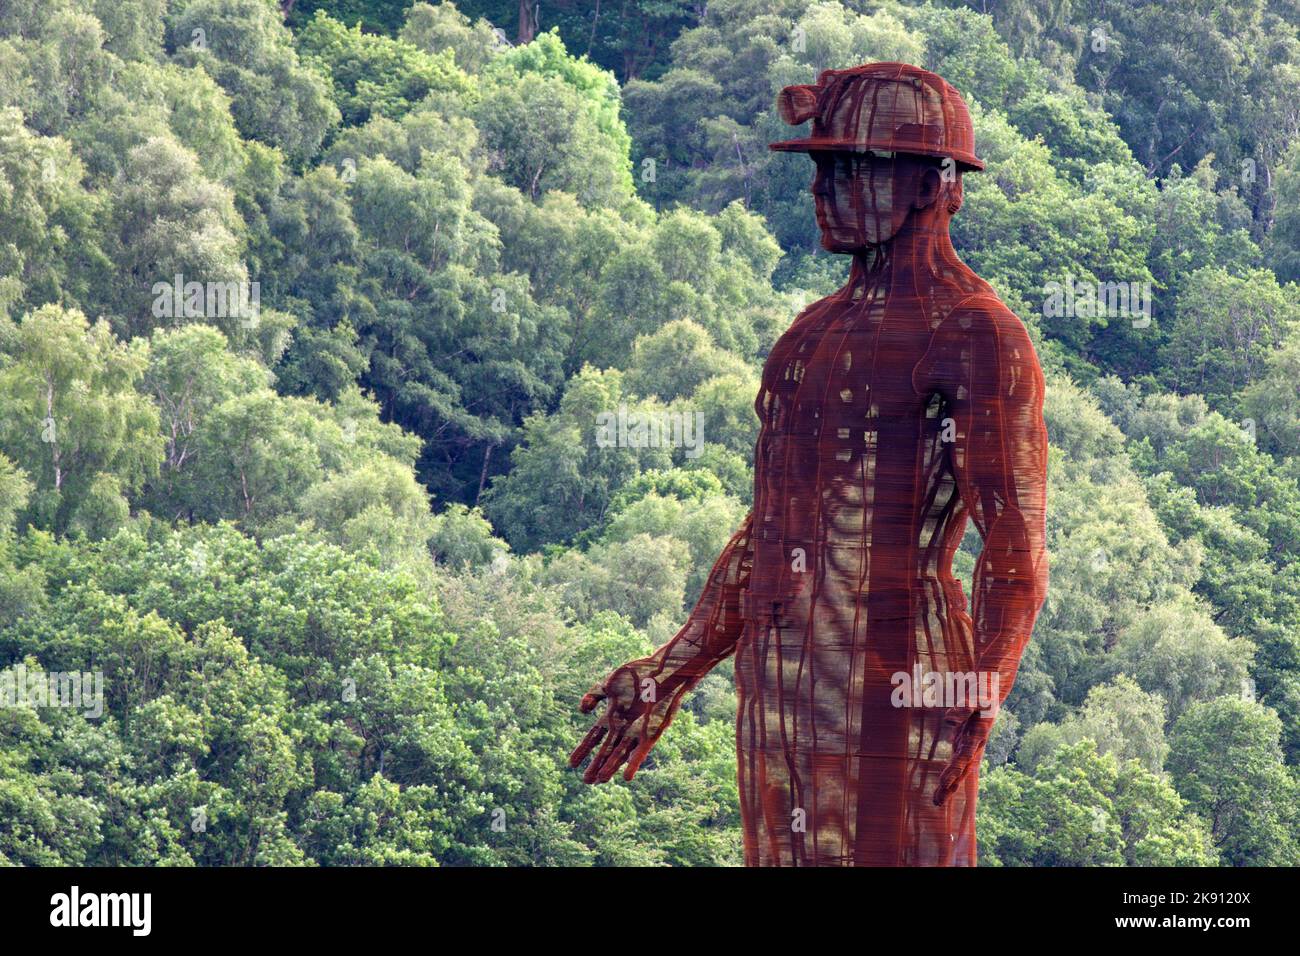 Six Bells mining memorial overlooking the mining village of Abertillery, Ebbw Vale, Blaenau Gwent, South Wales, commemorating the 1960 mining disaster Stock Photo